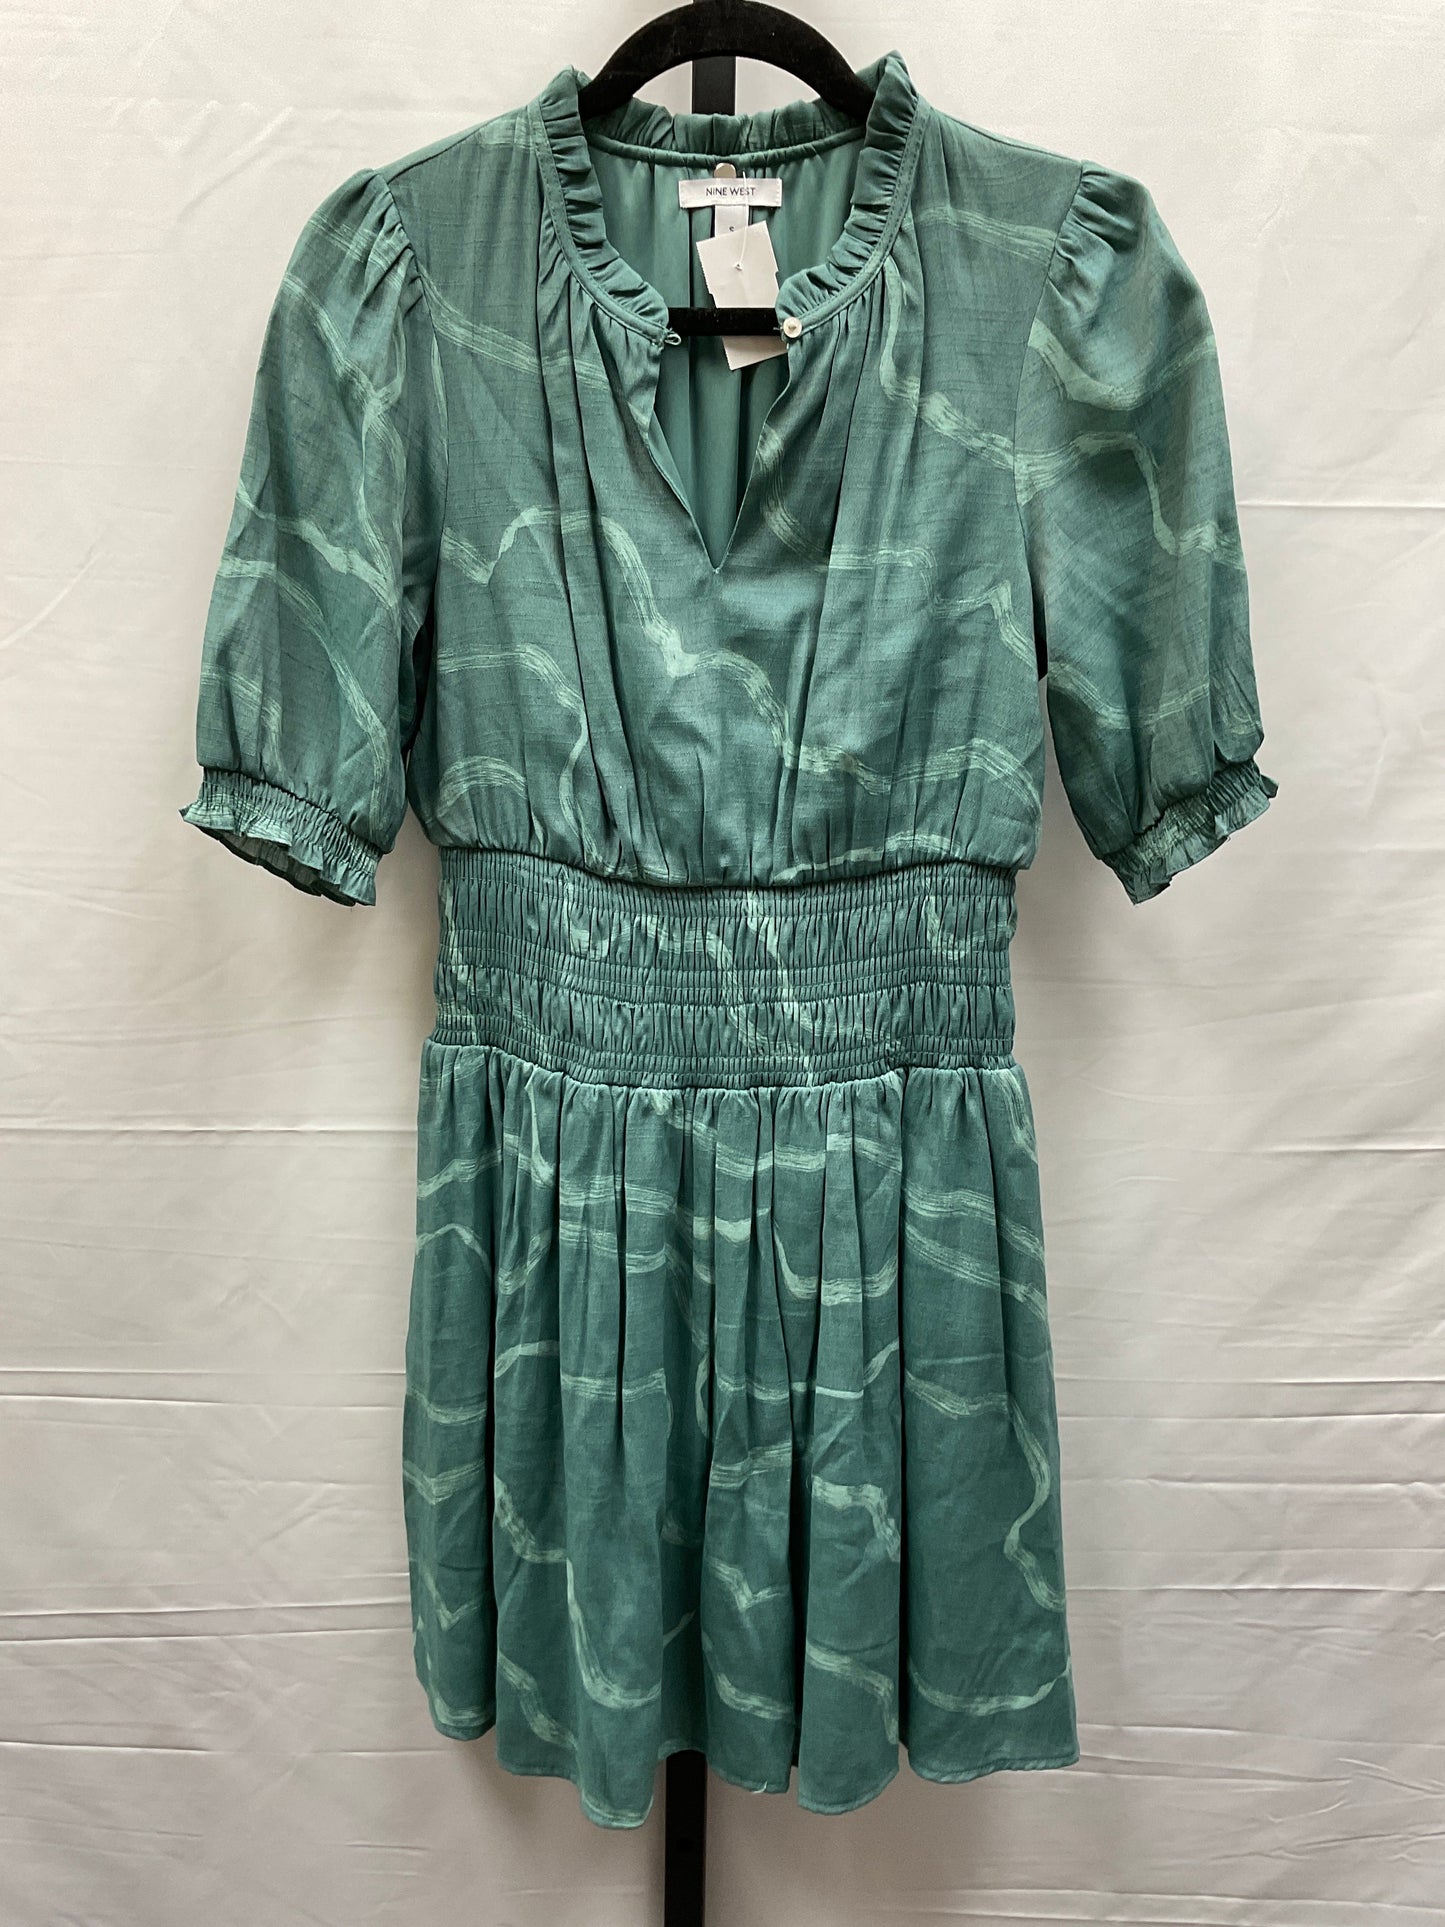 Green Dress Casual Short Nine West, Size S